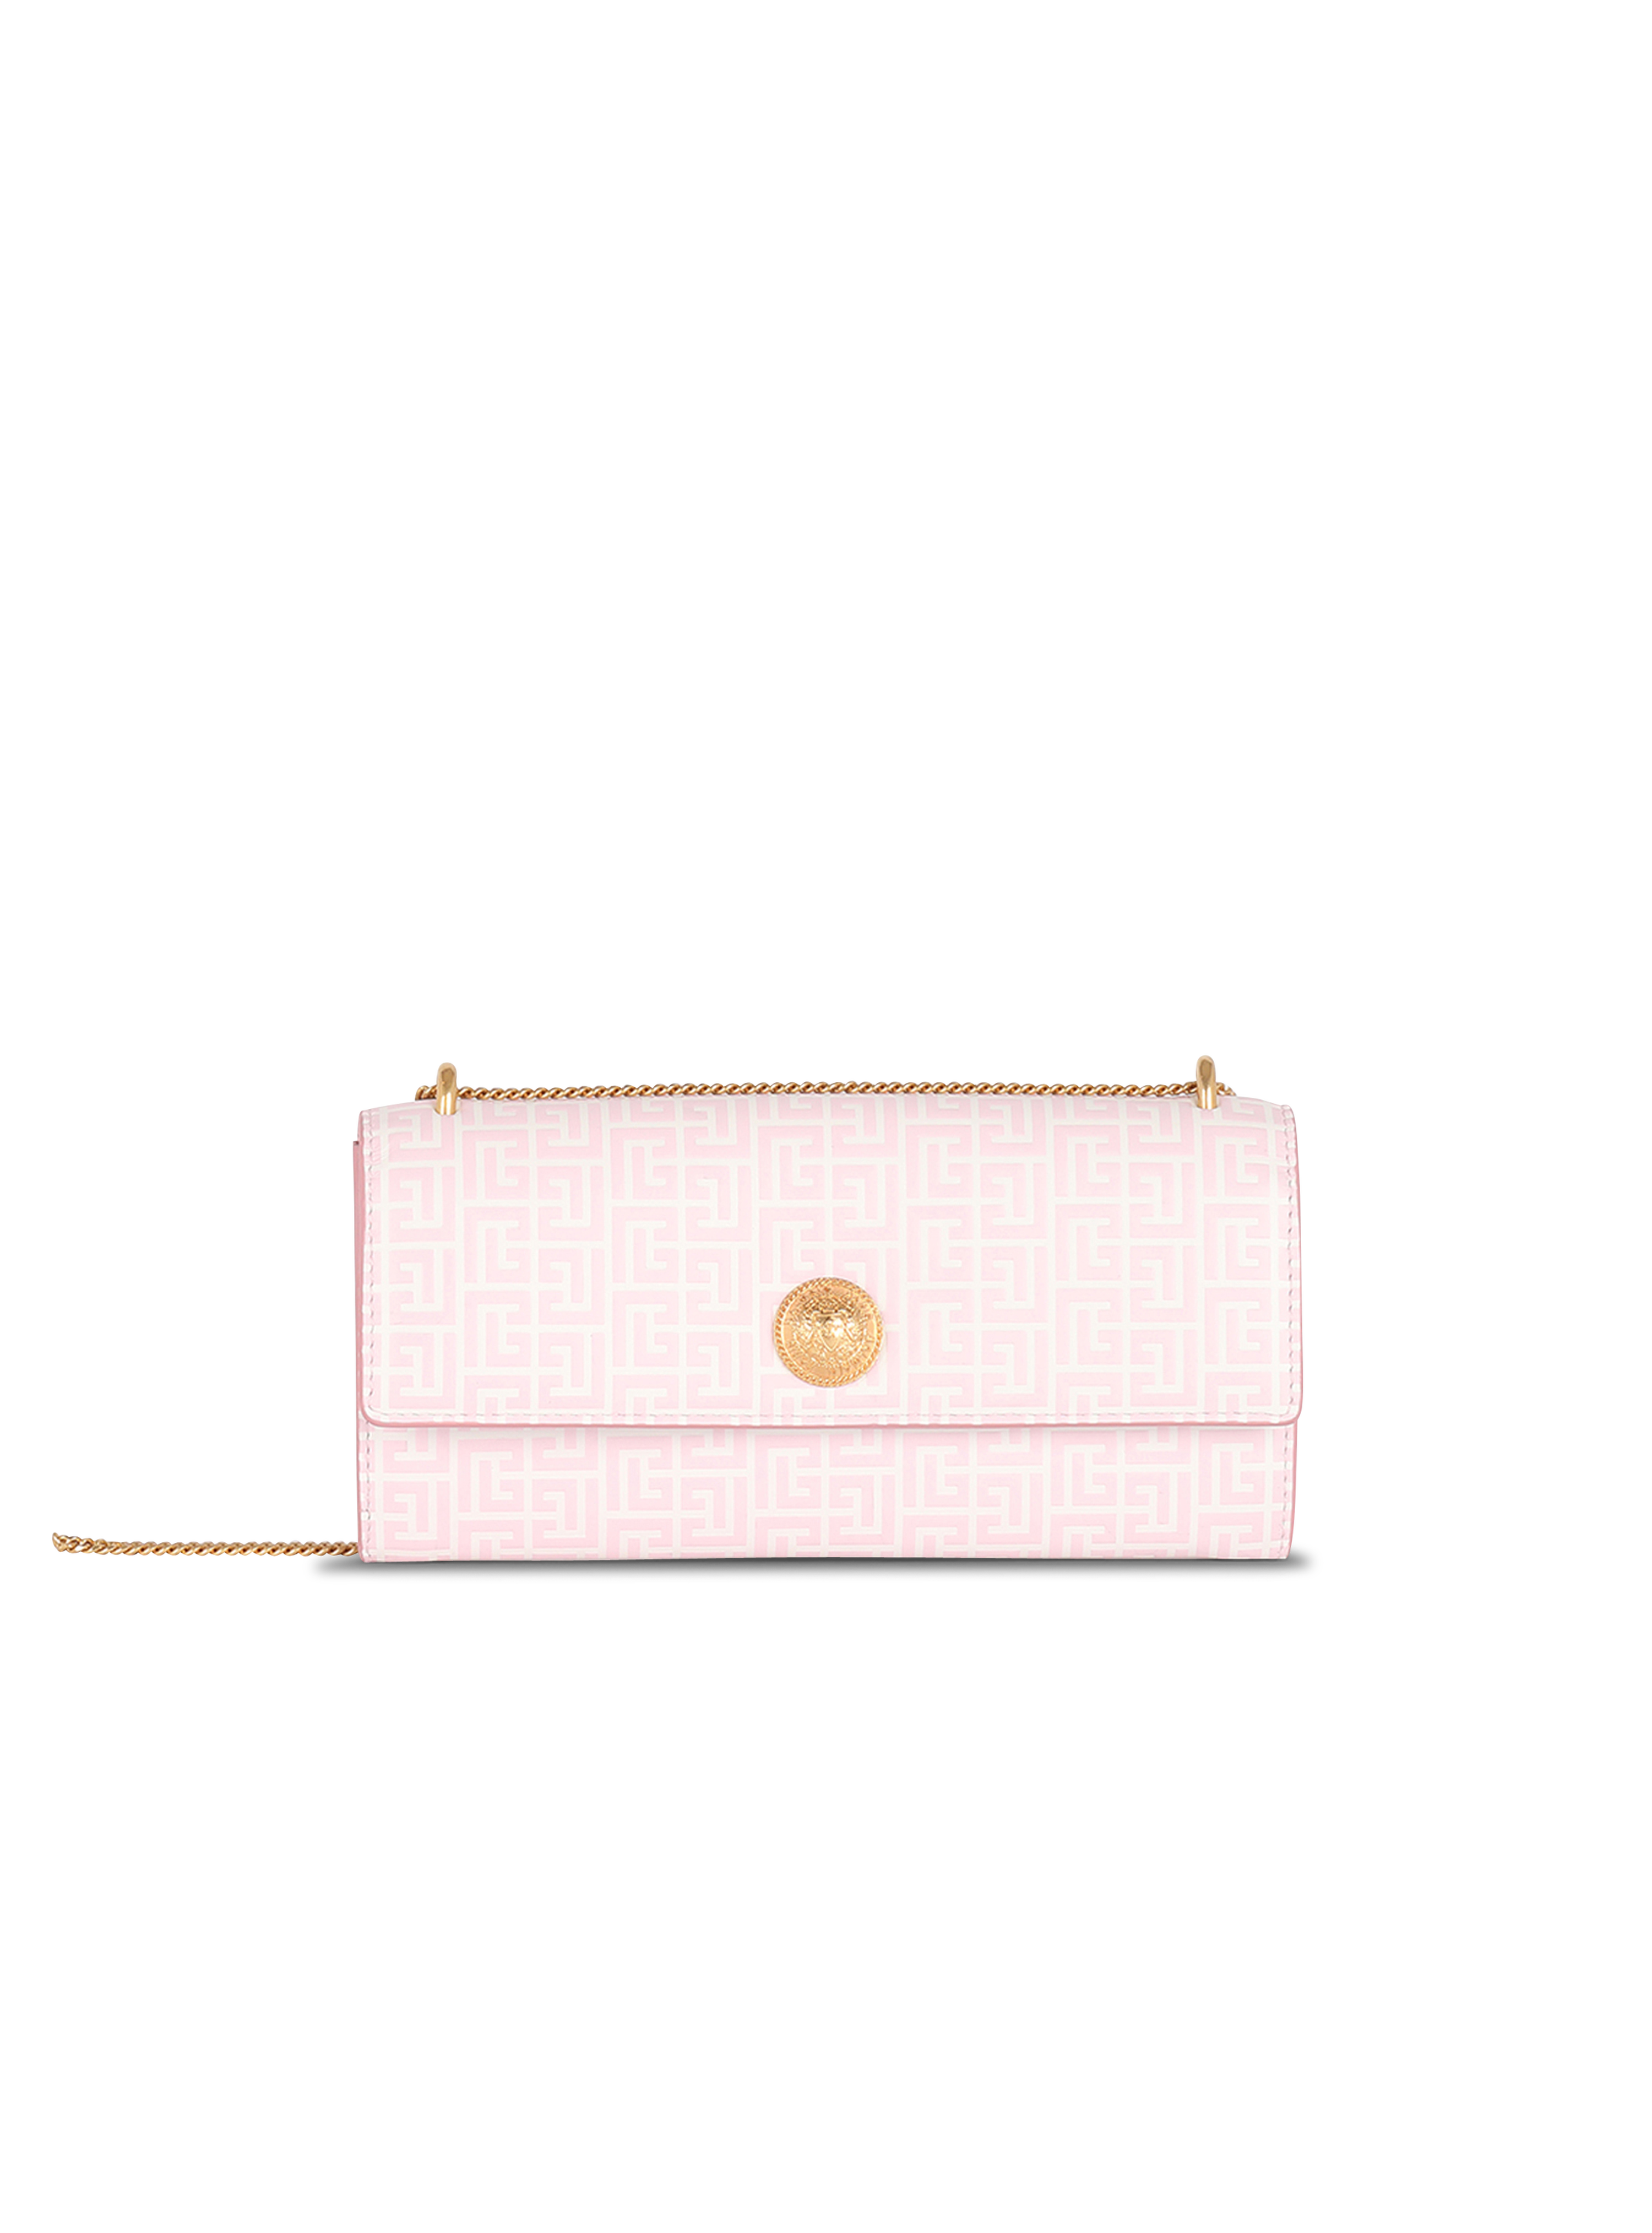 Embossed leather Coin wallet, pink